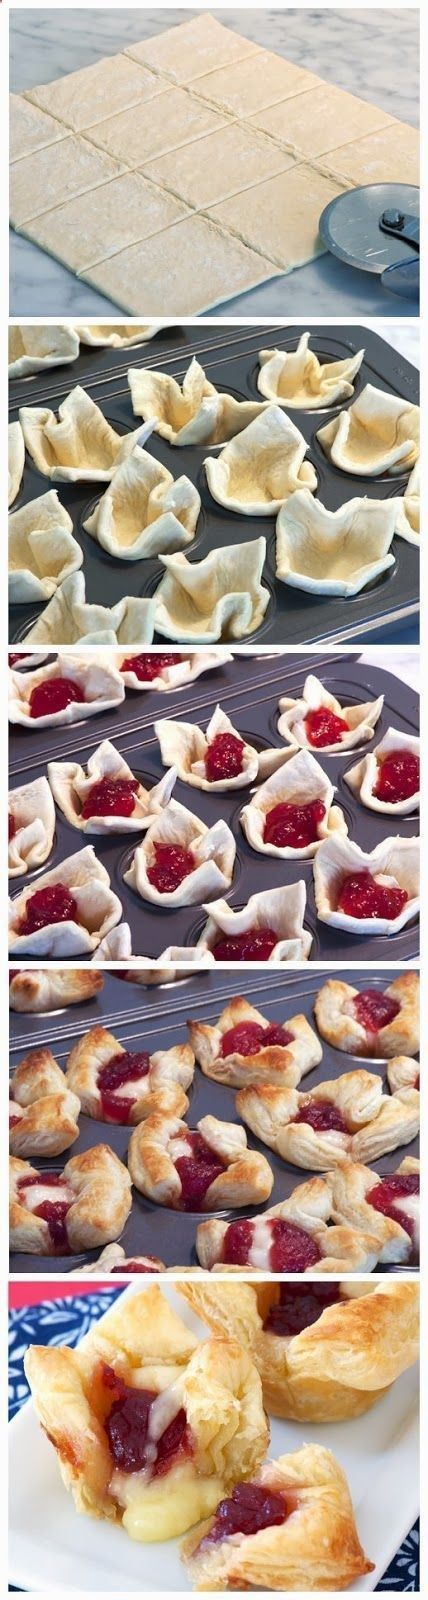 Cranberry brie bites, great Christmas Eve appetizer…maybe replace with raspberry